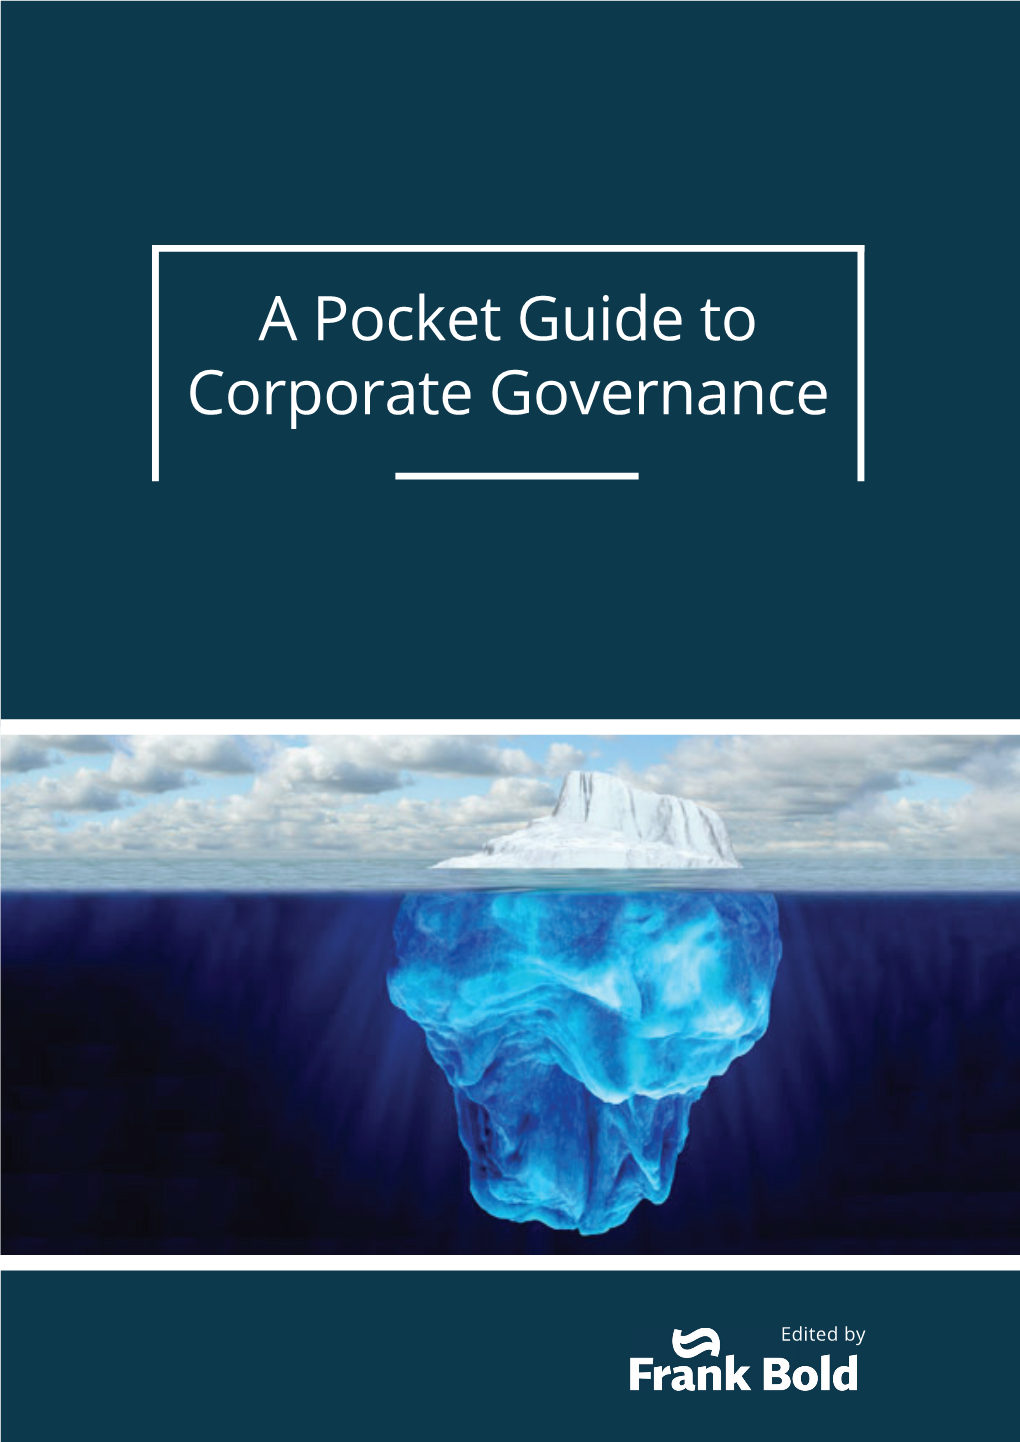 A Pocket Guide to Corporate Governance